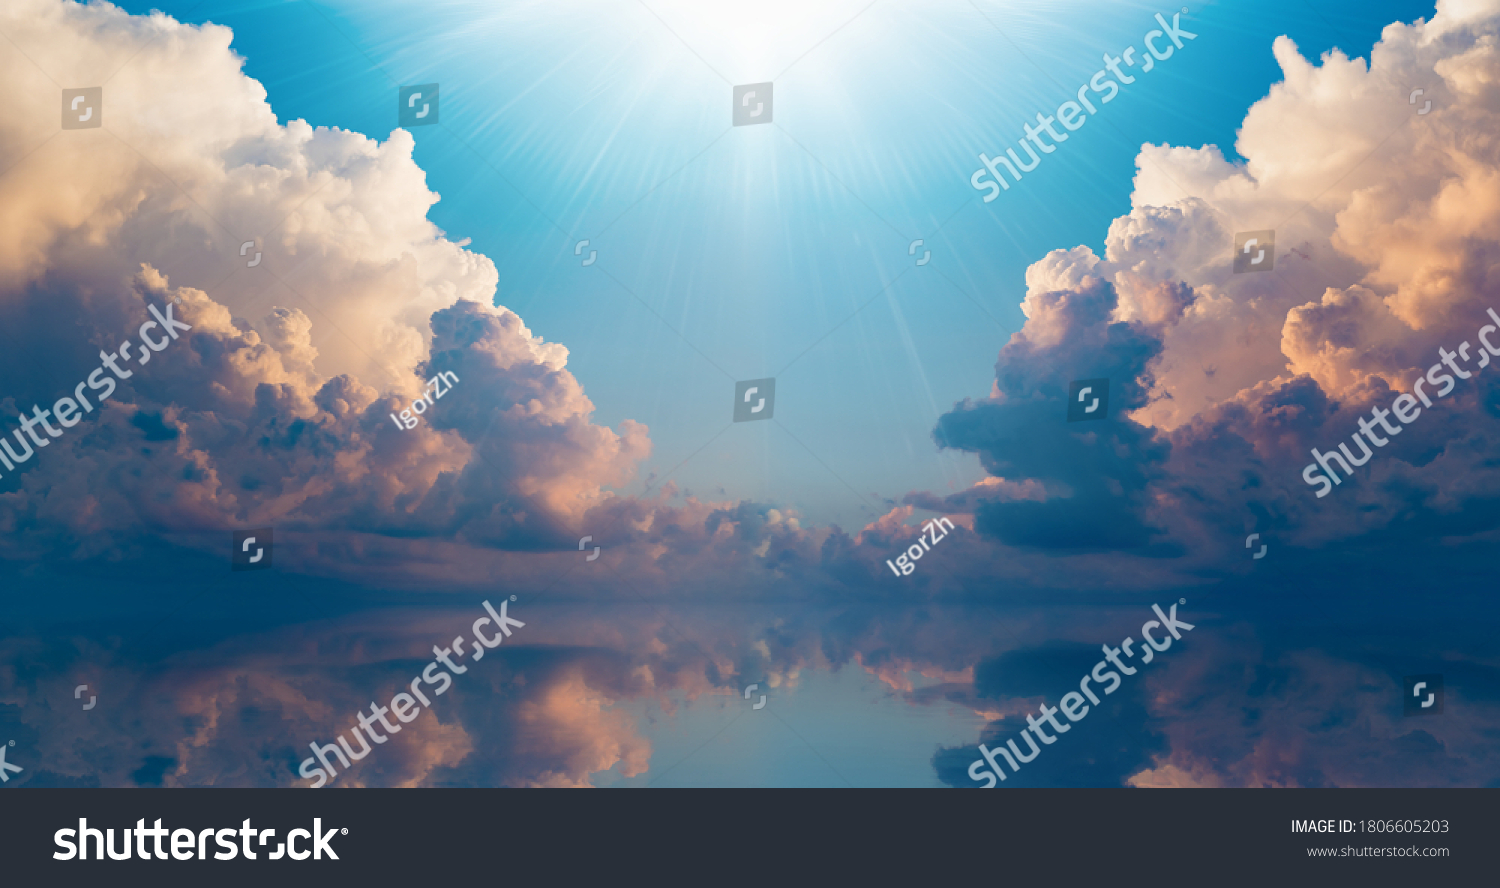 Beautiful religious image - bright light from heaven, light of hope and happyness from skies.  #1806605203